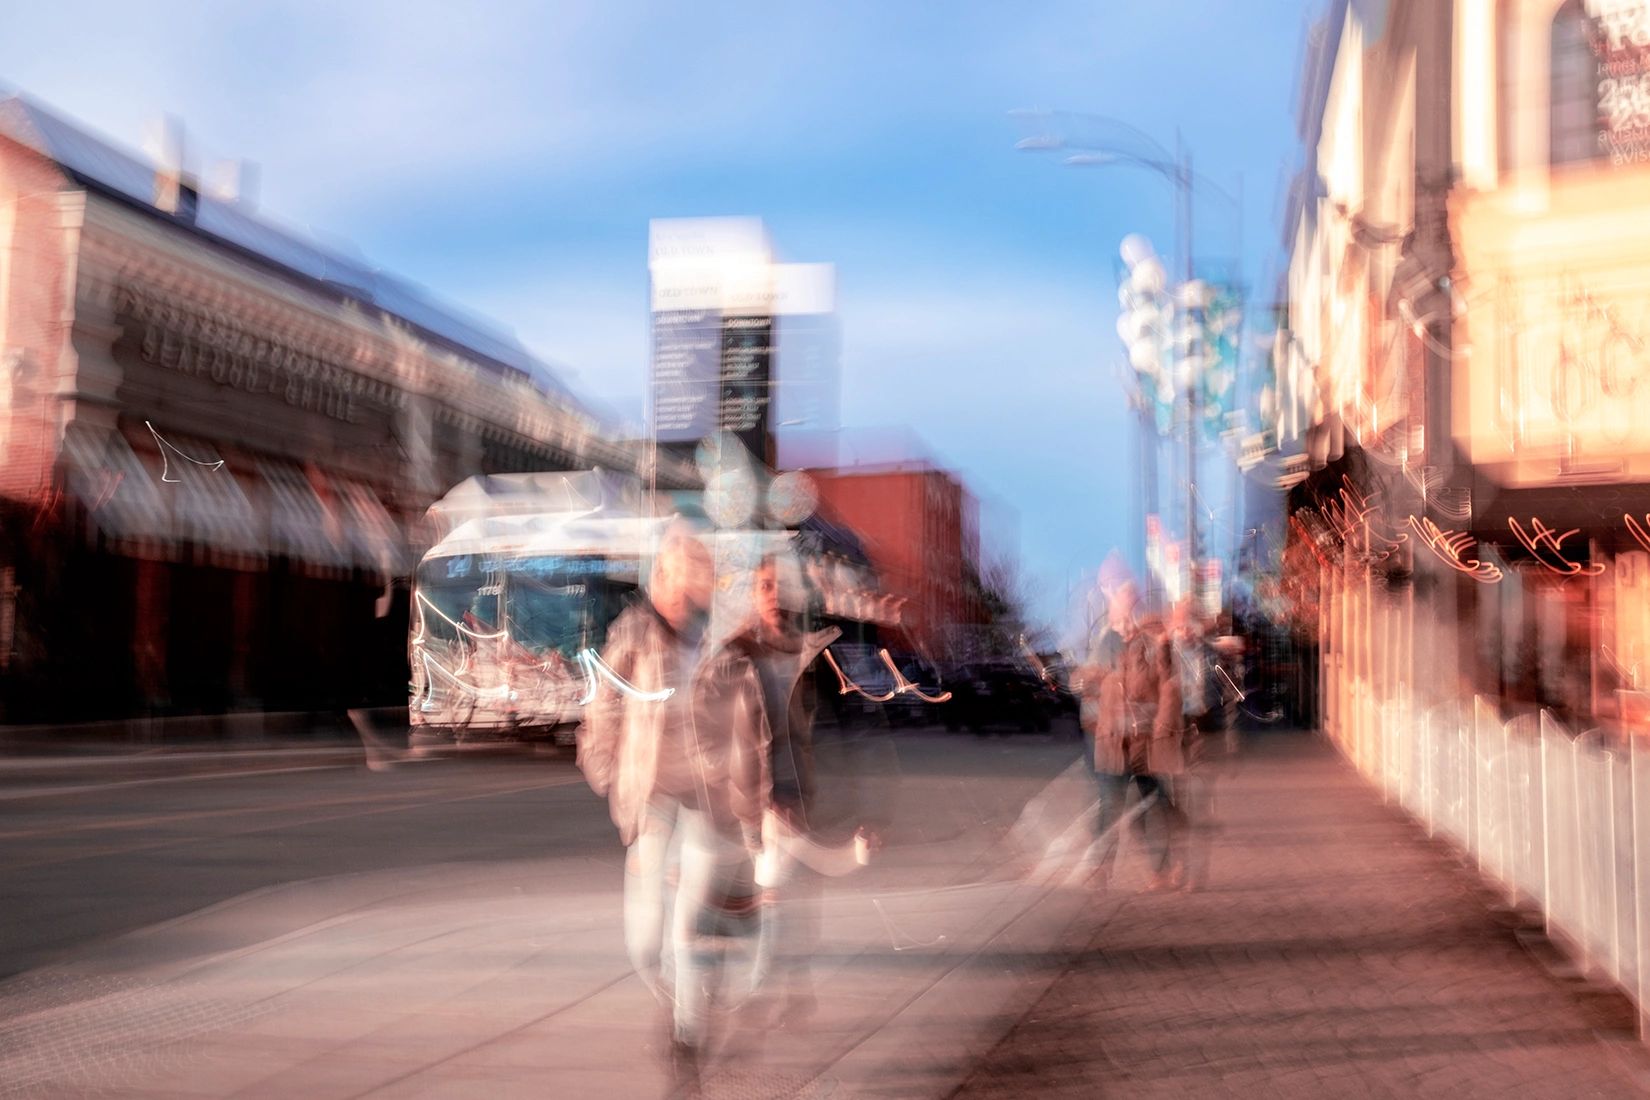 An abstract take on street photography with an autistic mind by Canadian photographer Chad Coombs.